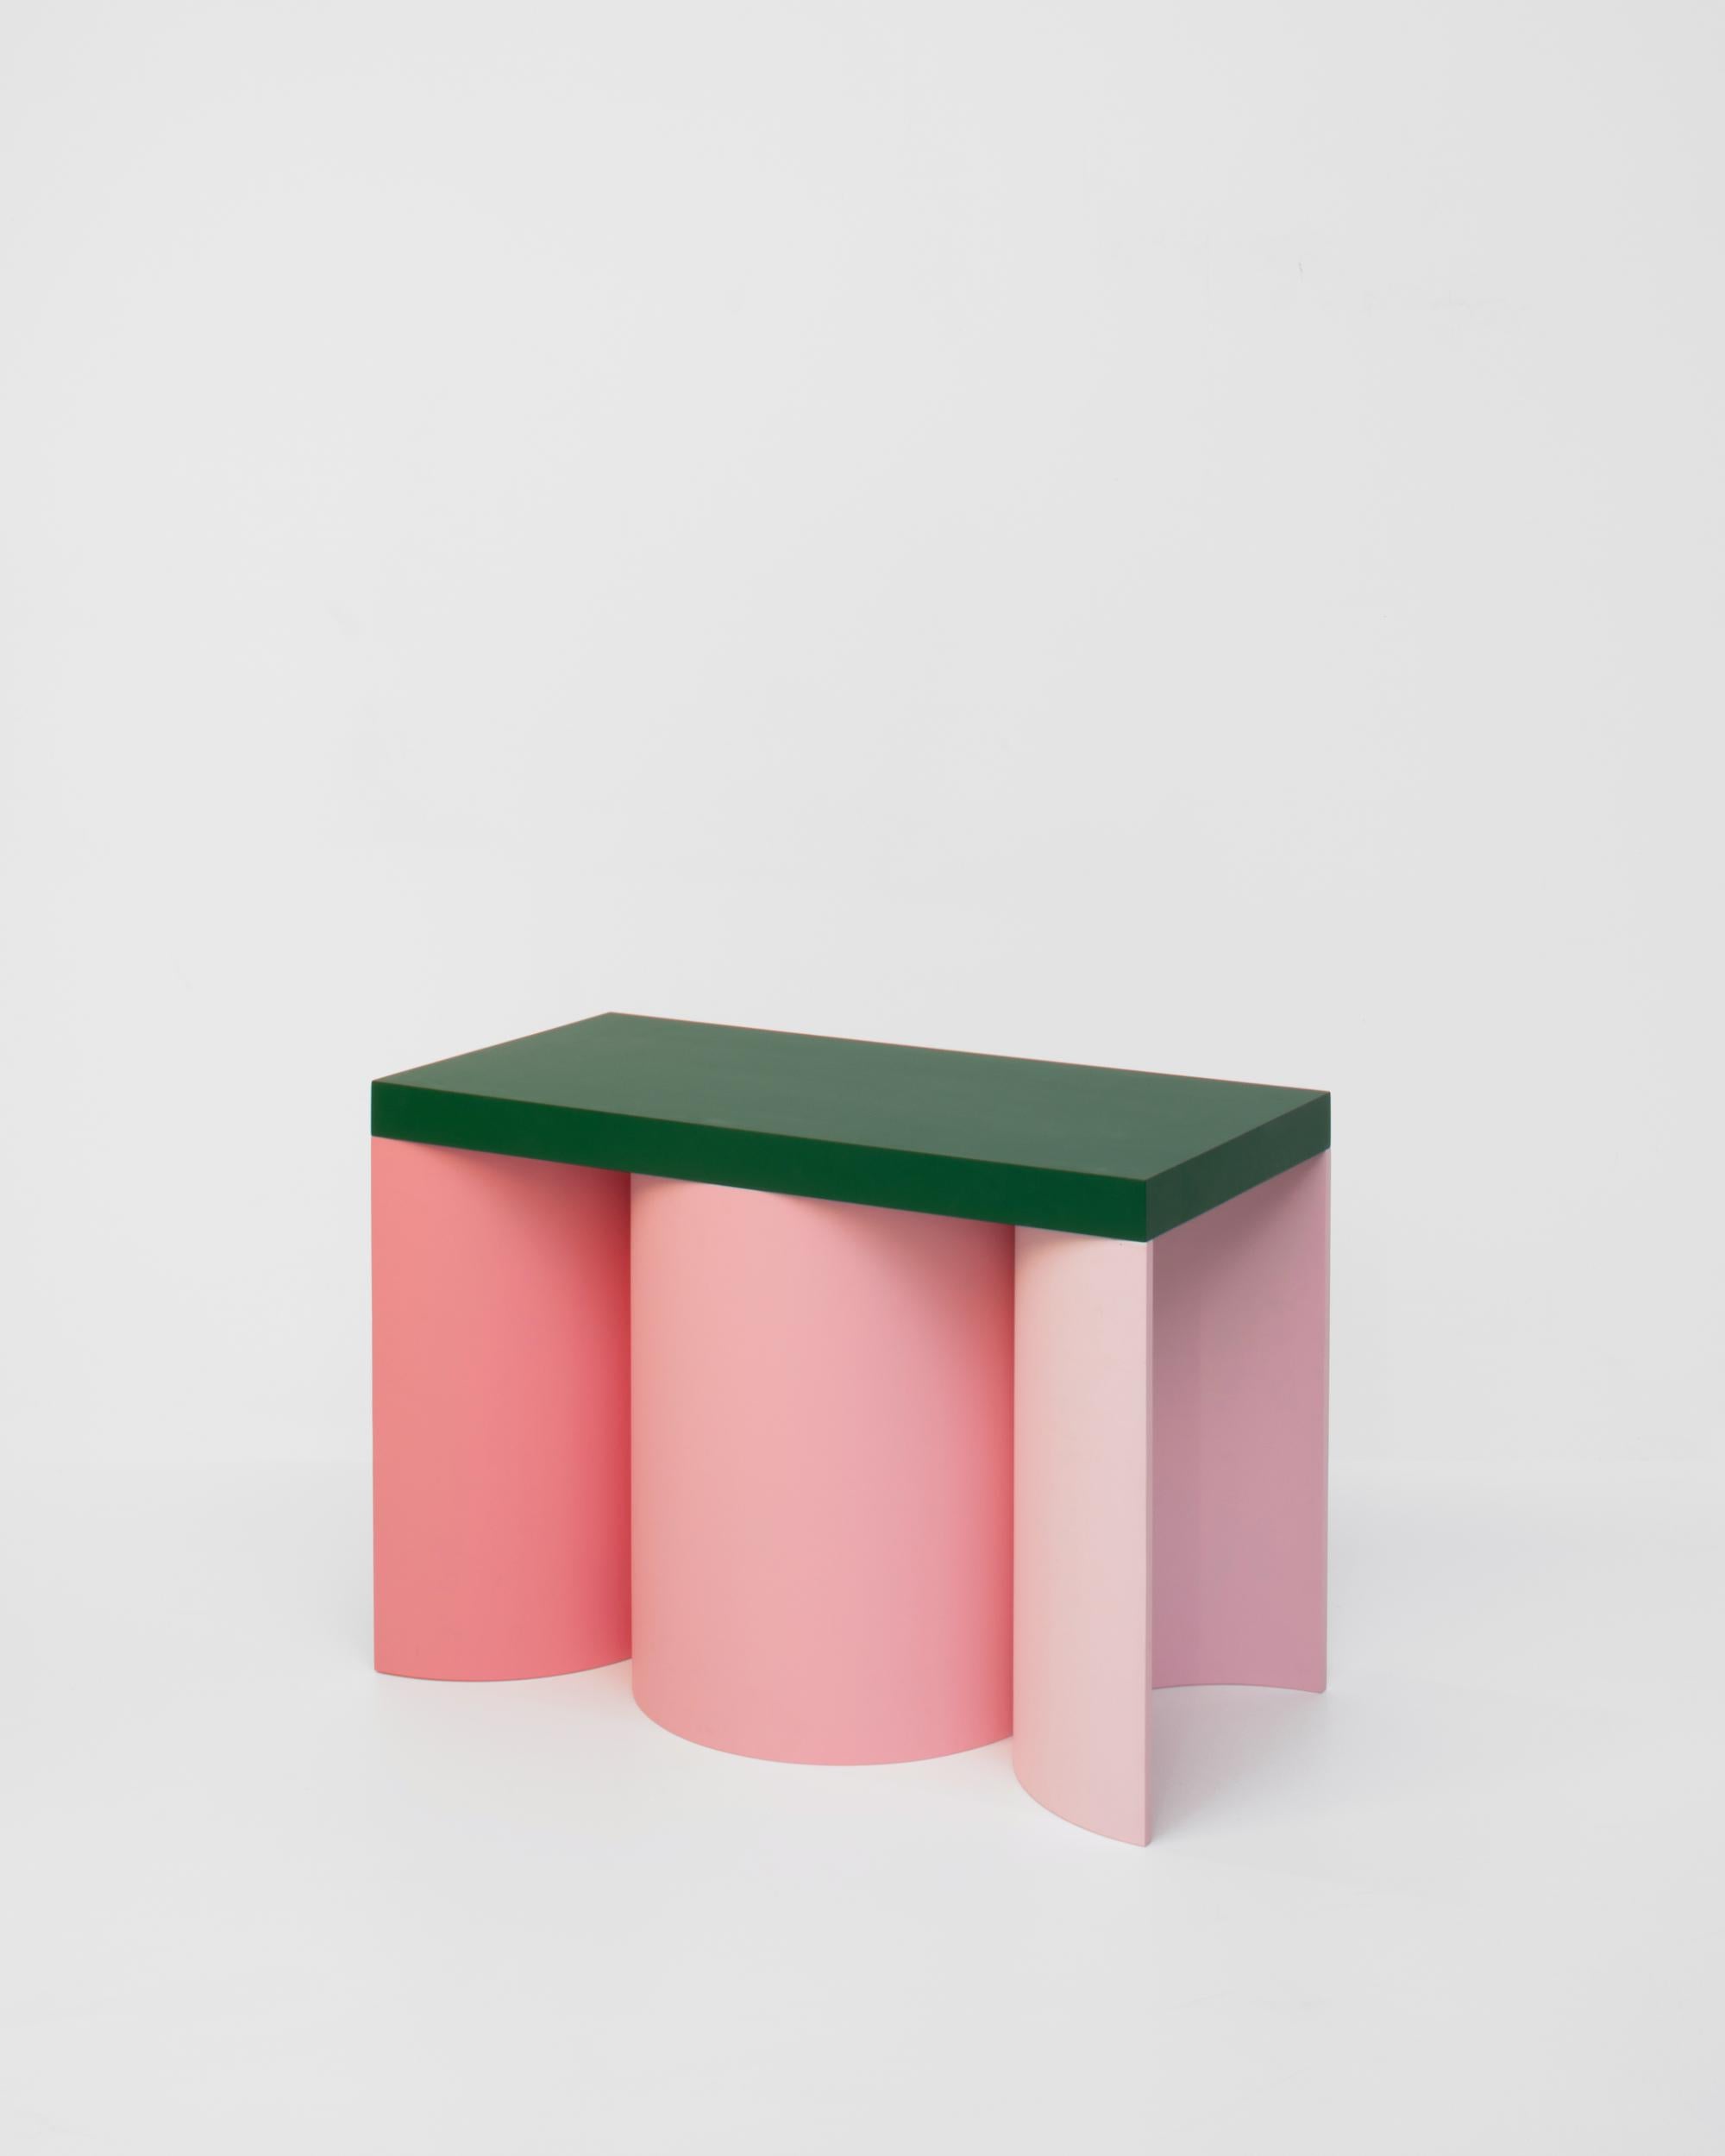 Colorful stool with a contemporary design. 

Carefully handmade in our atelier. Manufactured in an artisanal way, in which every step of the process is carefully executed

The base of this stool consists of 1 hollow cylinder. It's topped with a